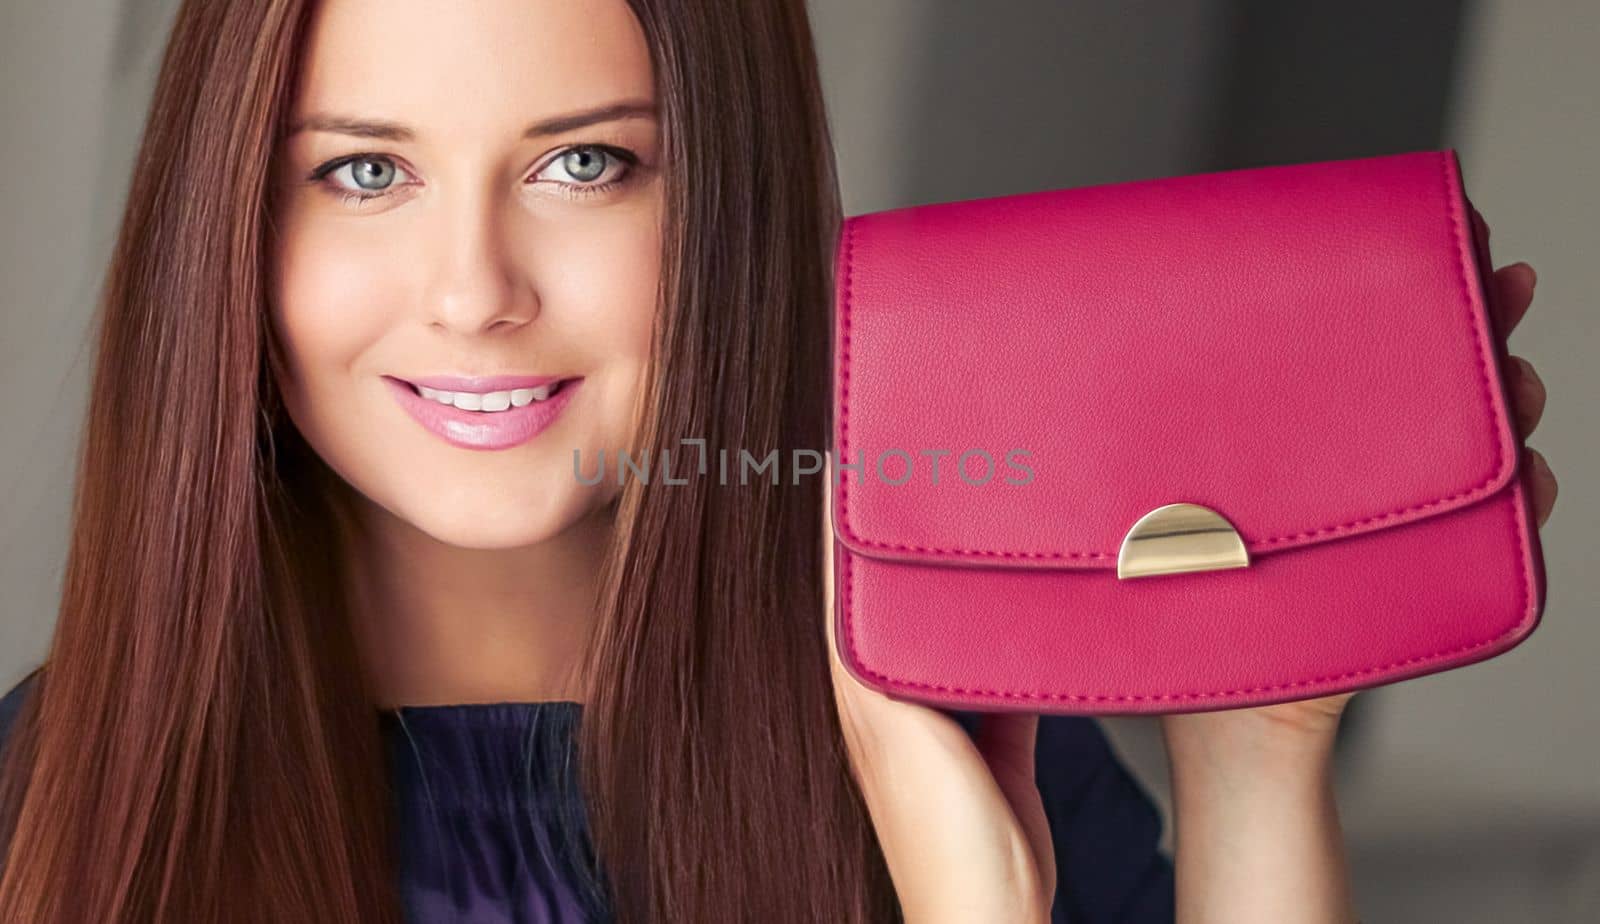 Fashion and accessories, happy beautiful woman holding small pink handbag with golden details as stylish accessory and luxury shopping by Anneleven